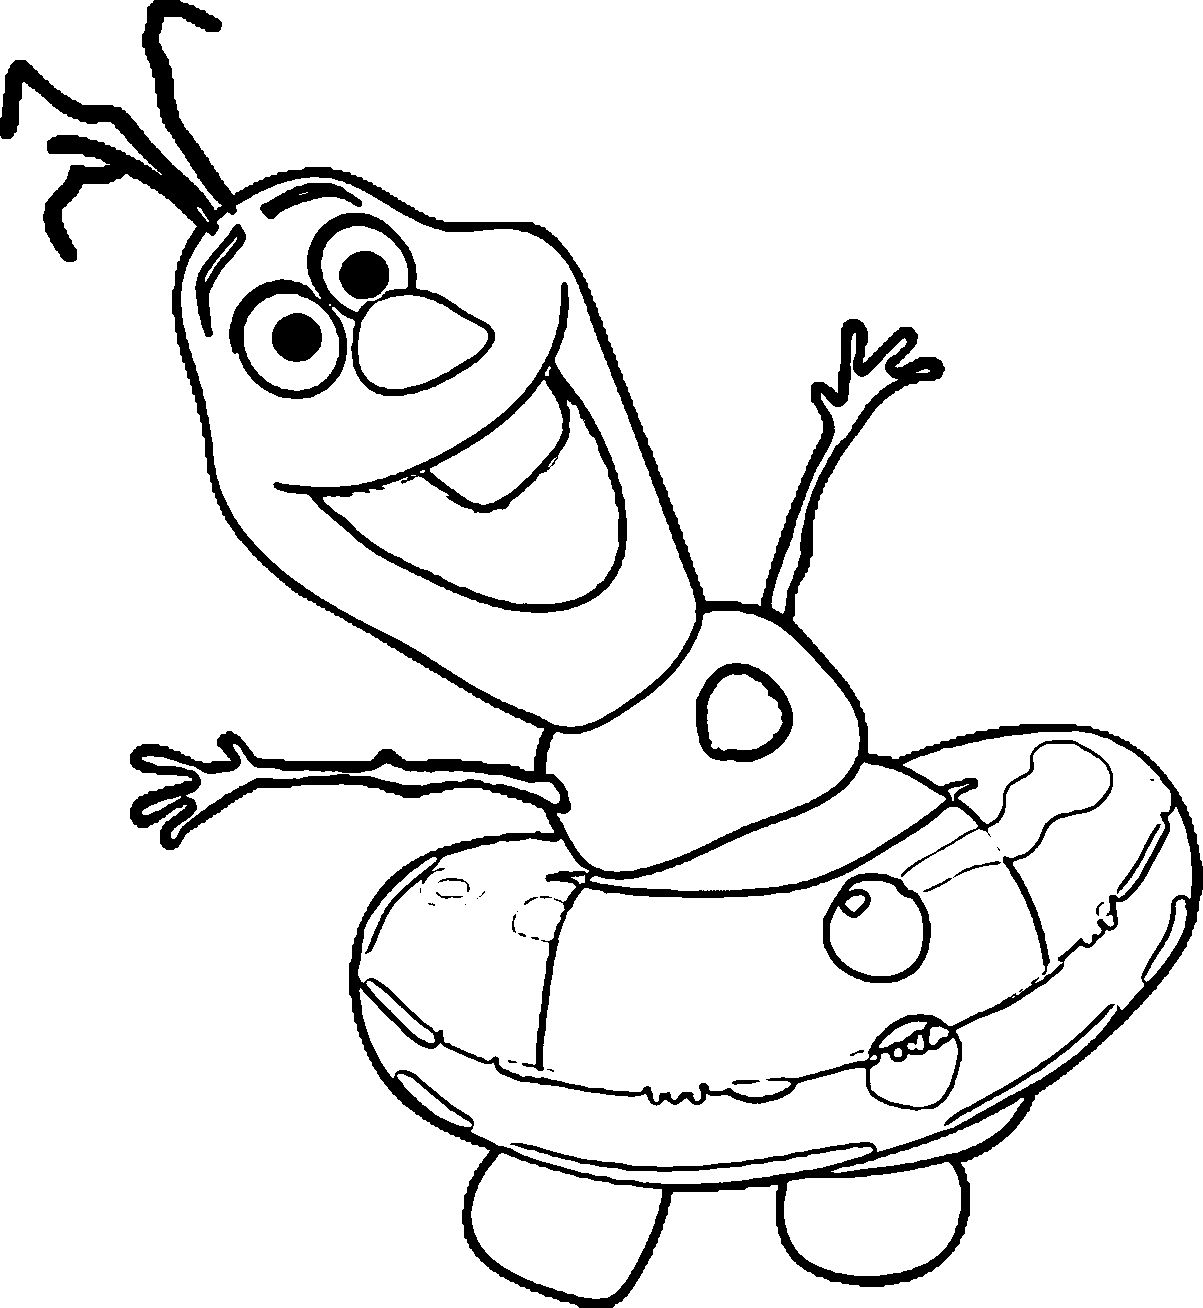 Frozens olaf coloring pages